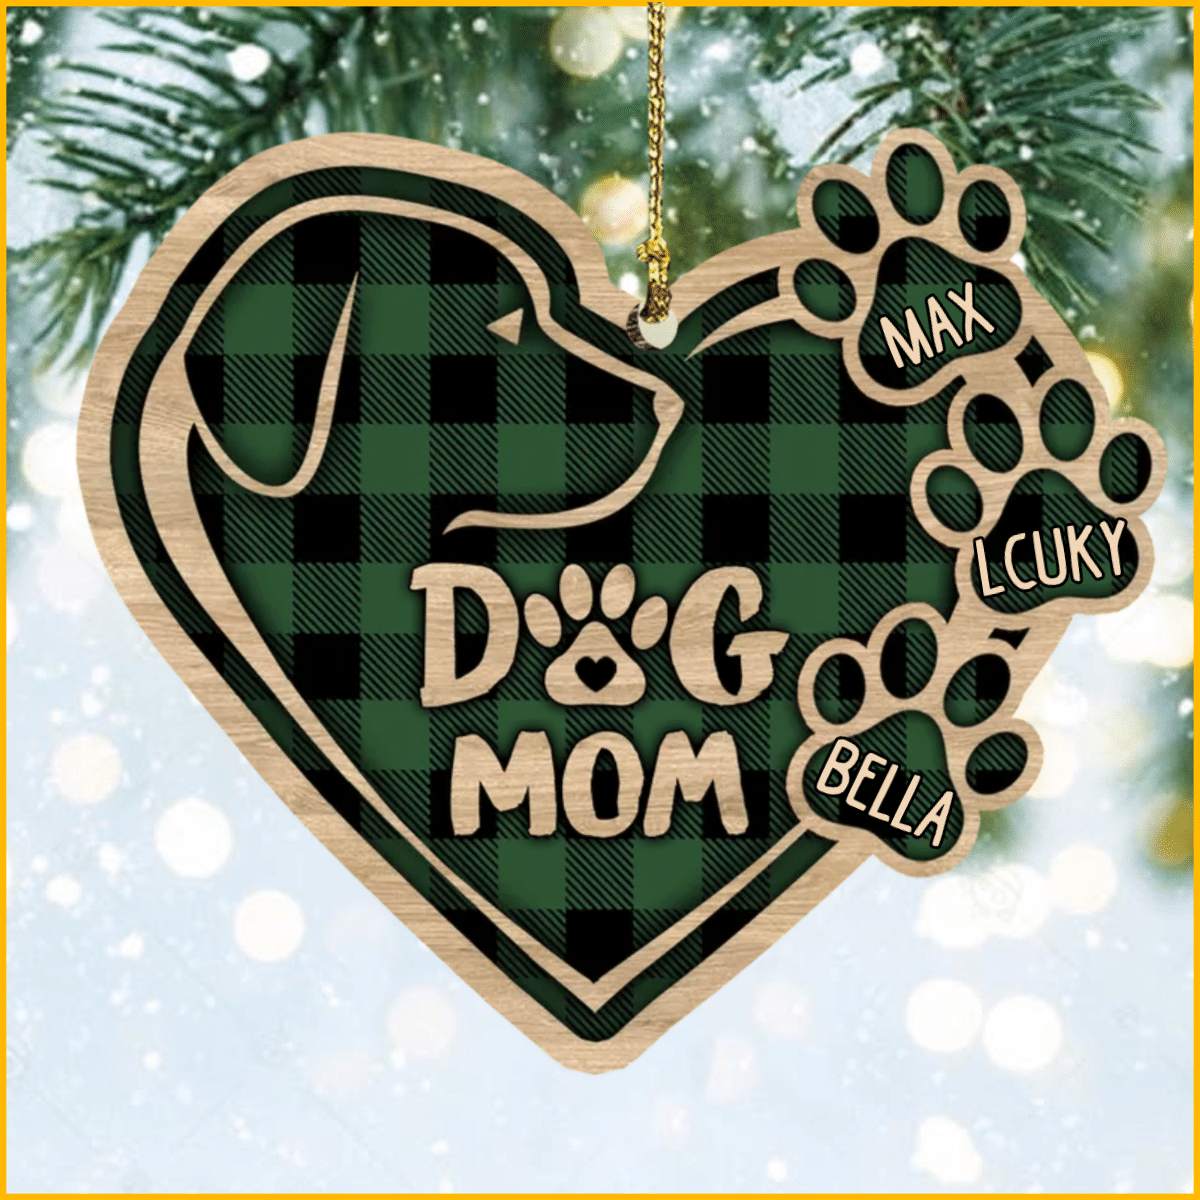 Christmas Dog Mom Heart Plaid Pattern Wood Ornament for Dog Mom Gifts